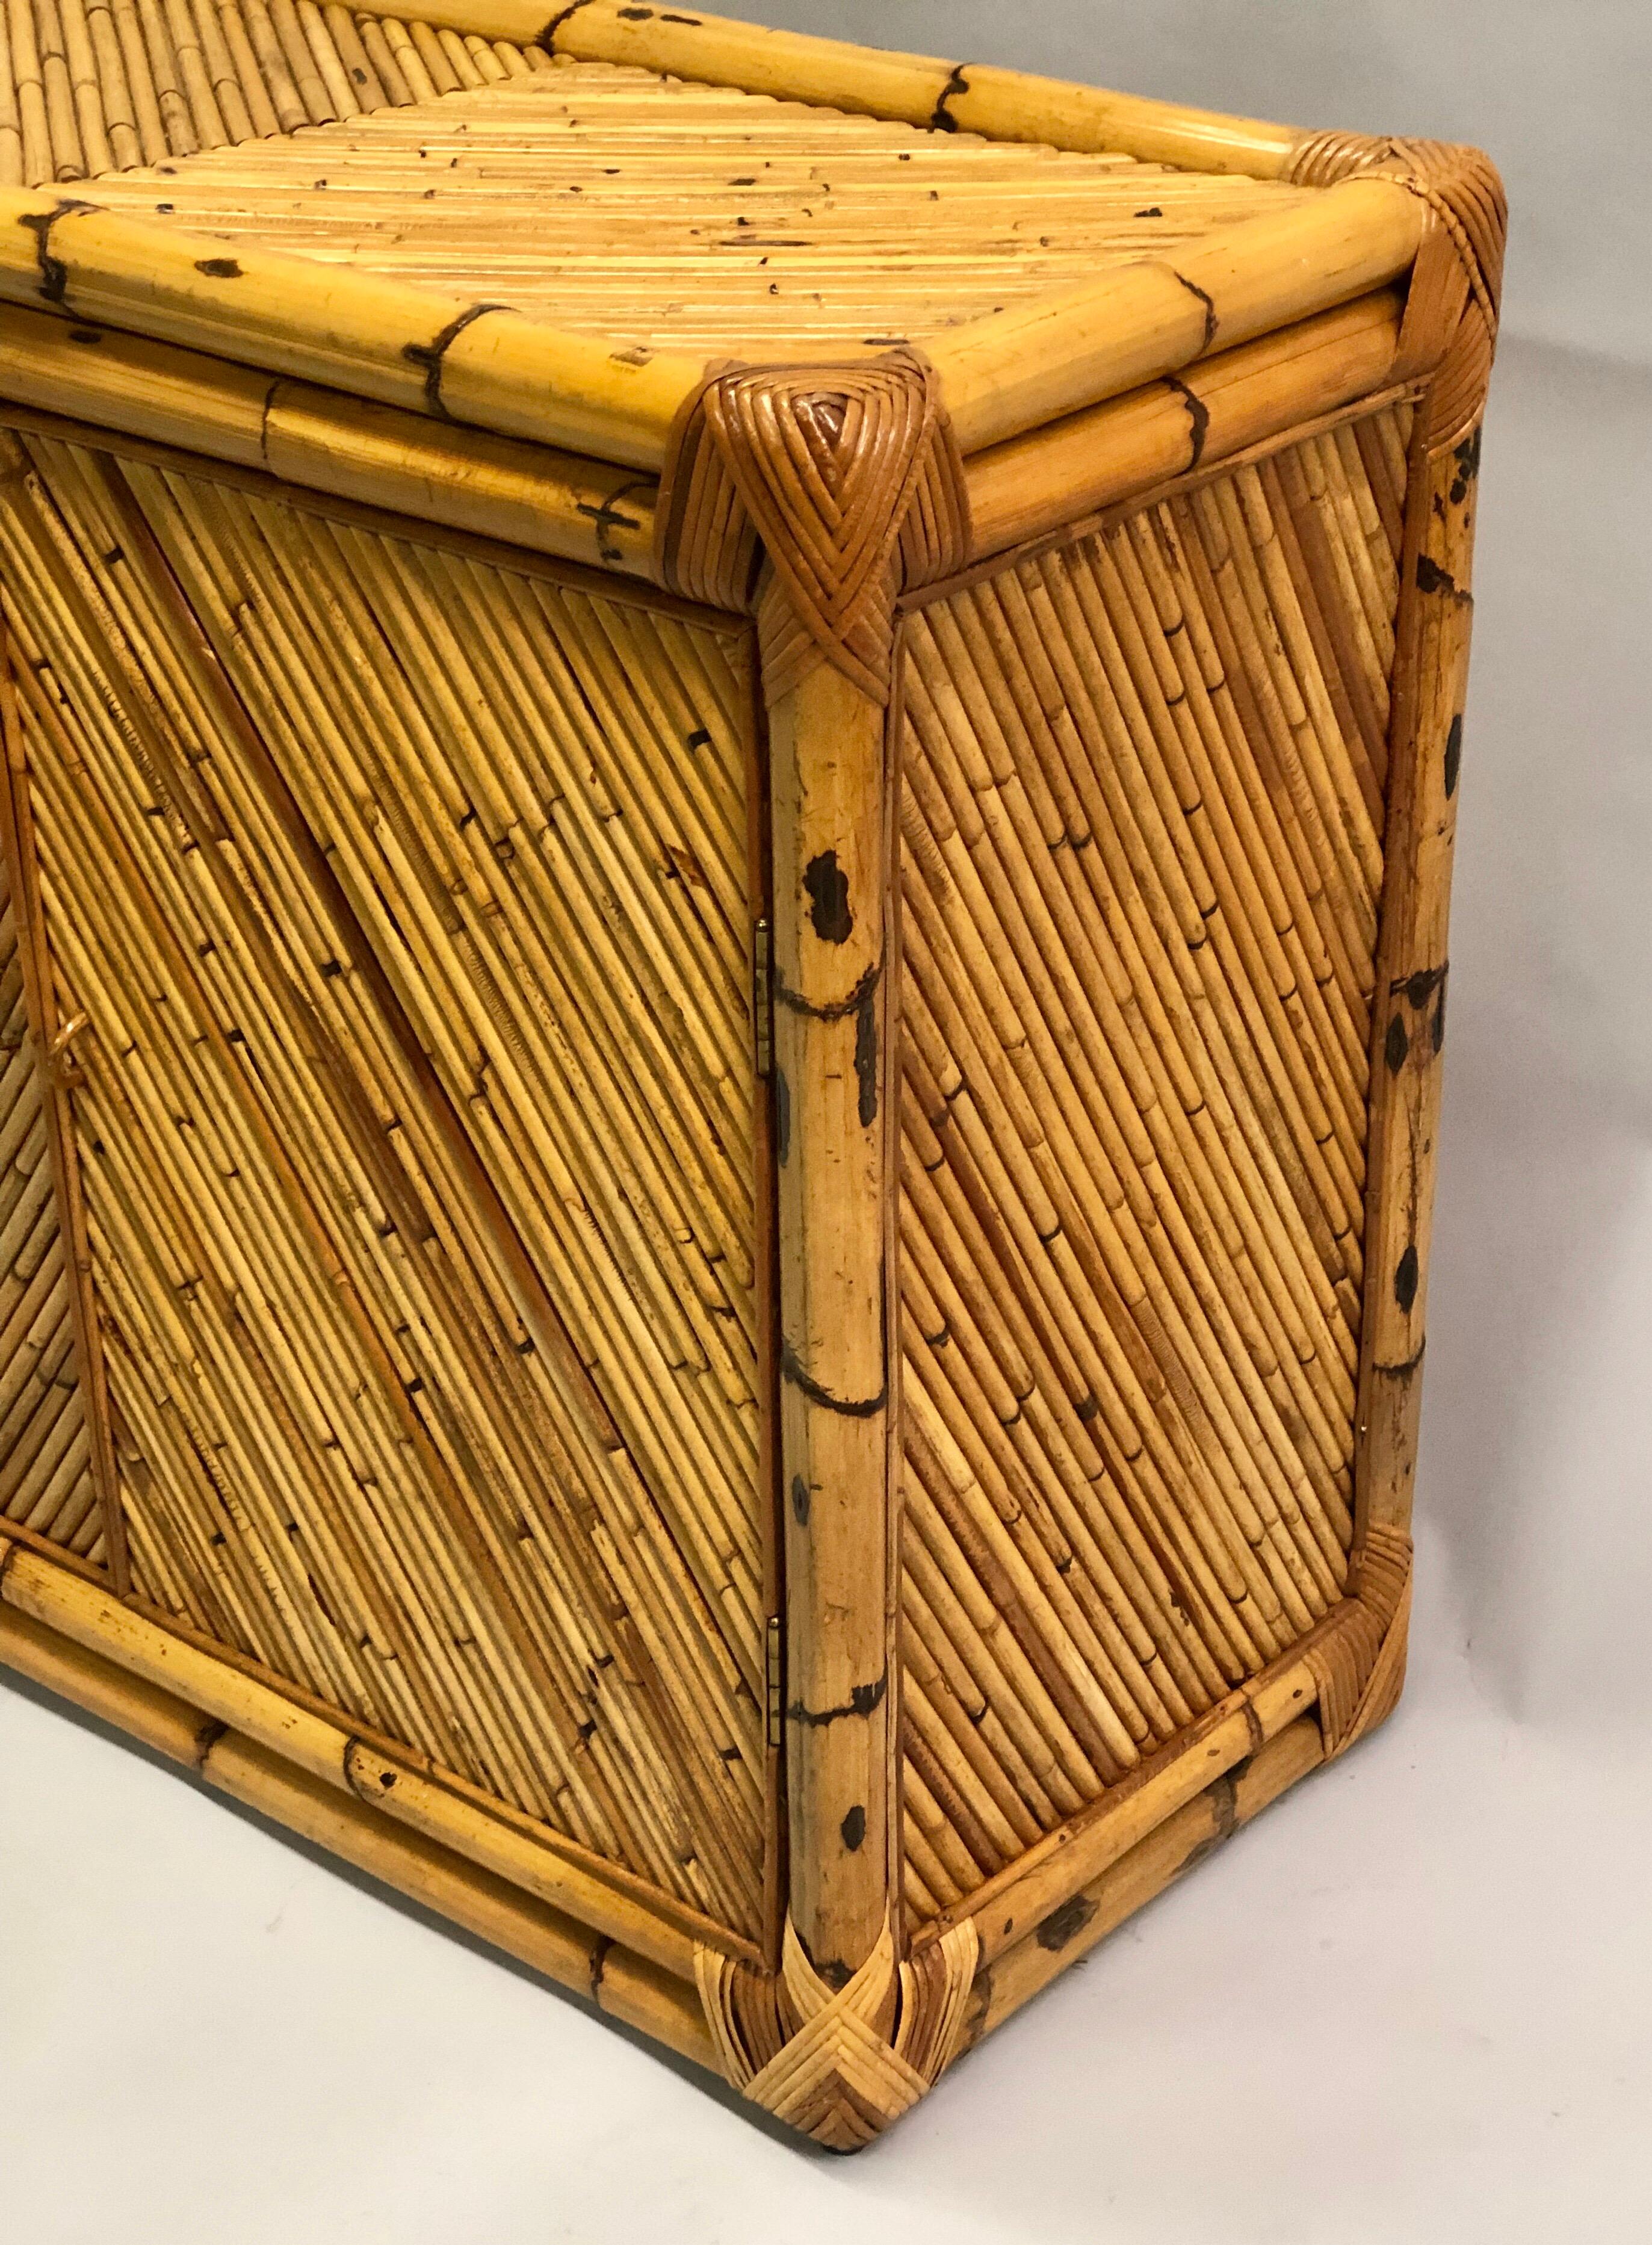 20th Century French Mid-Century Modern Neoclassical Rattan and Bamboo Sideboard / Cabinet For Sale